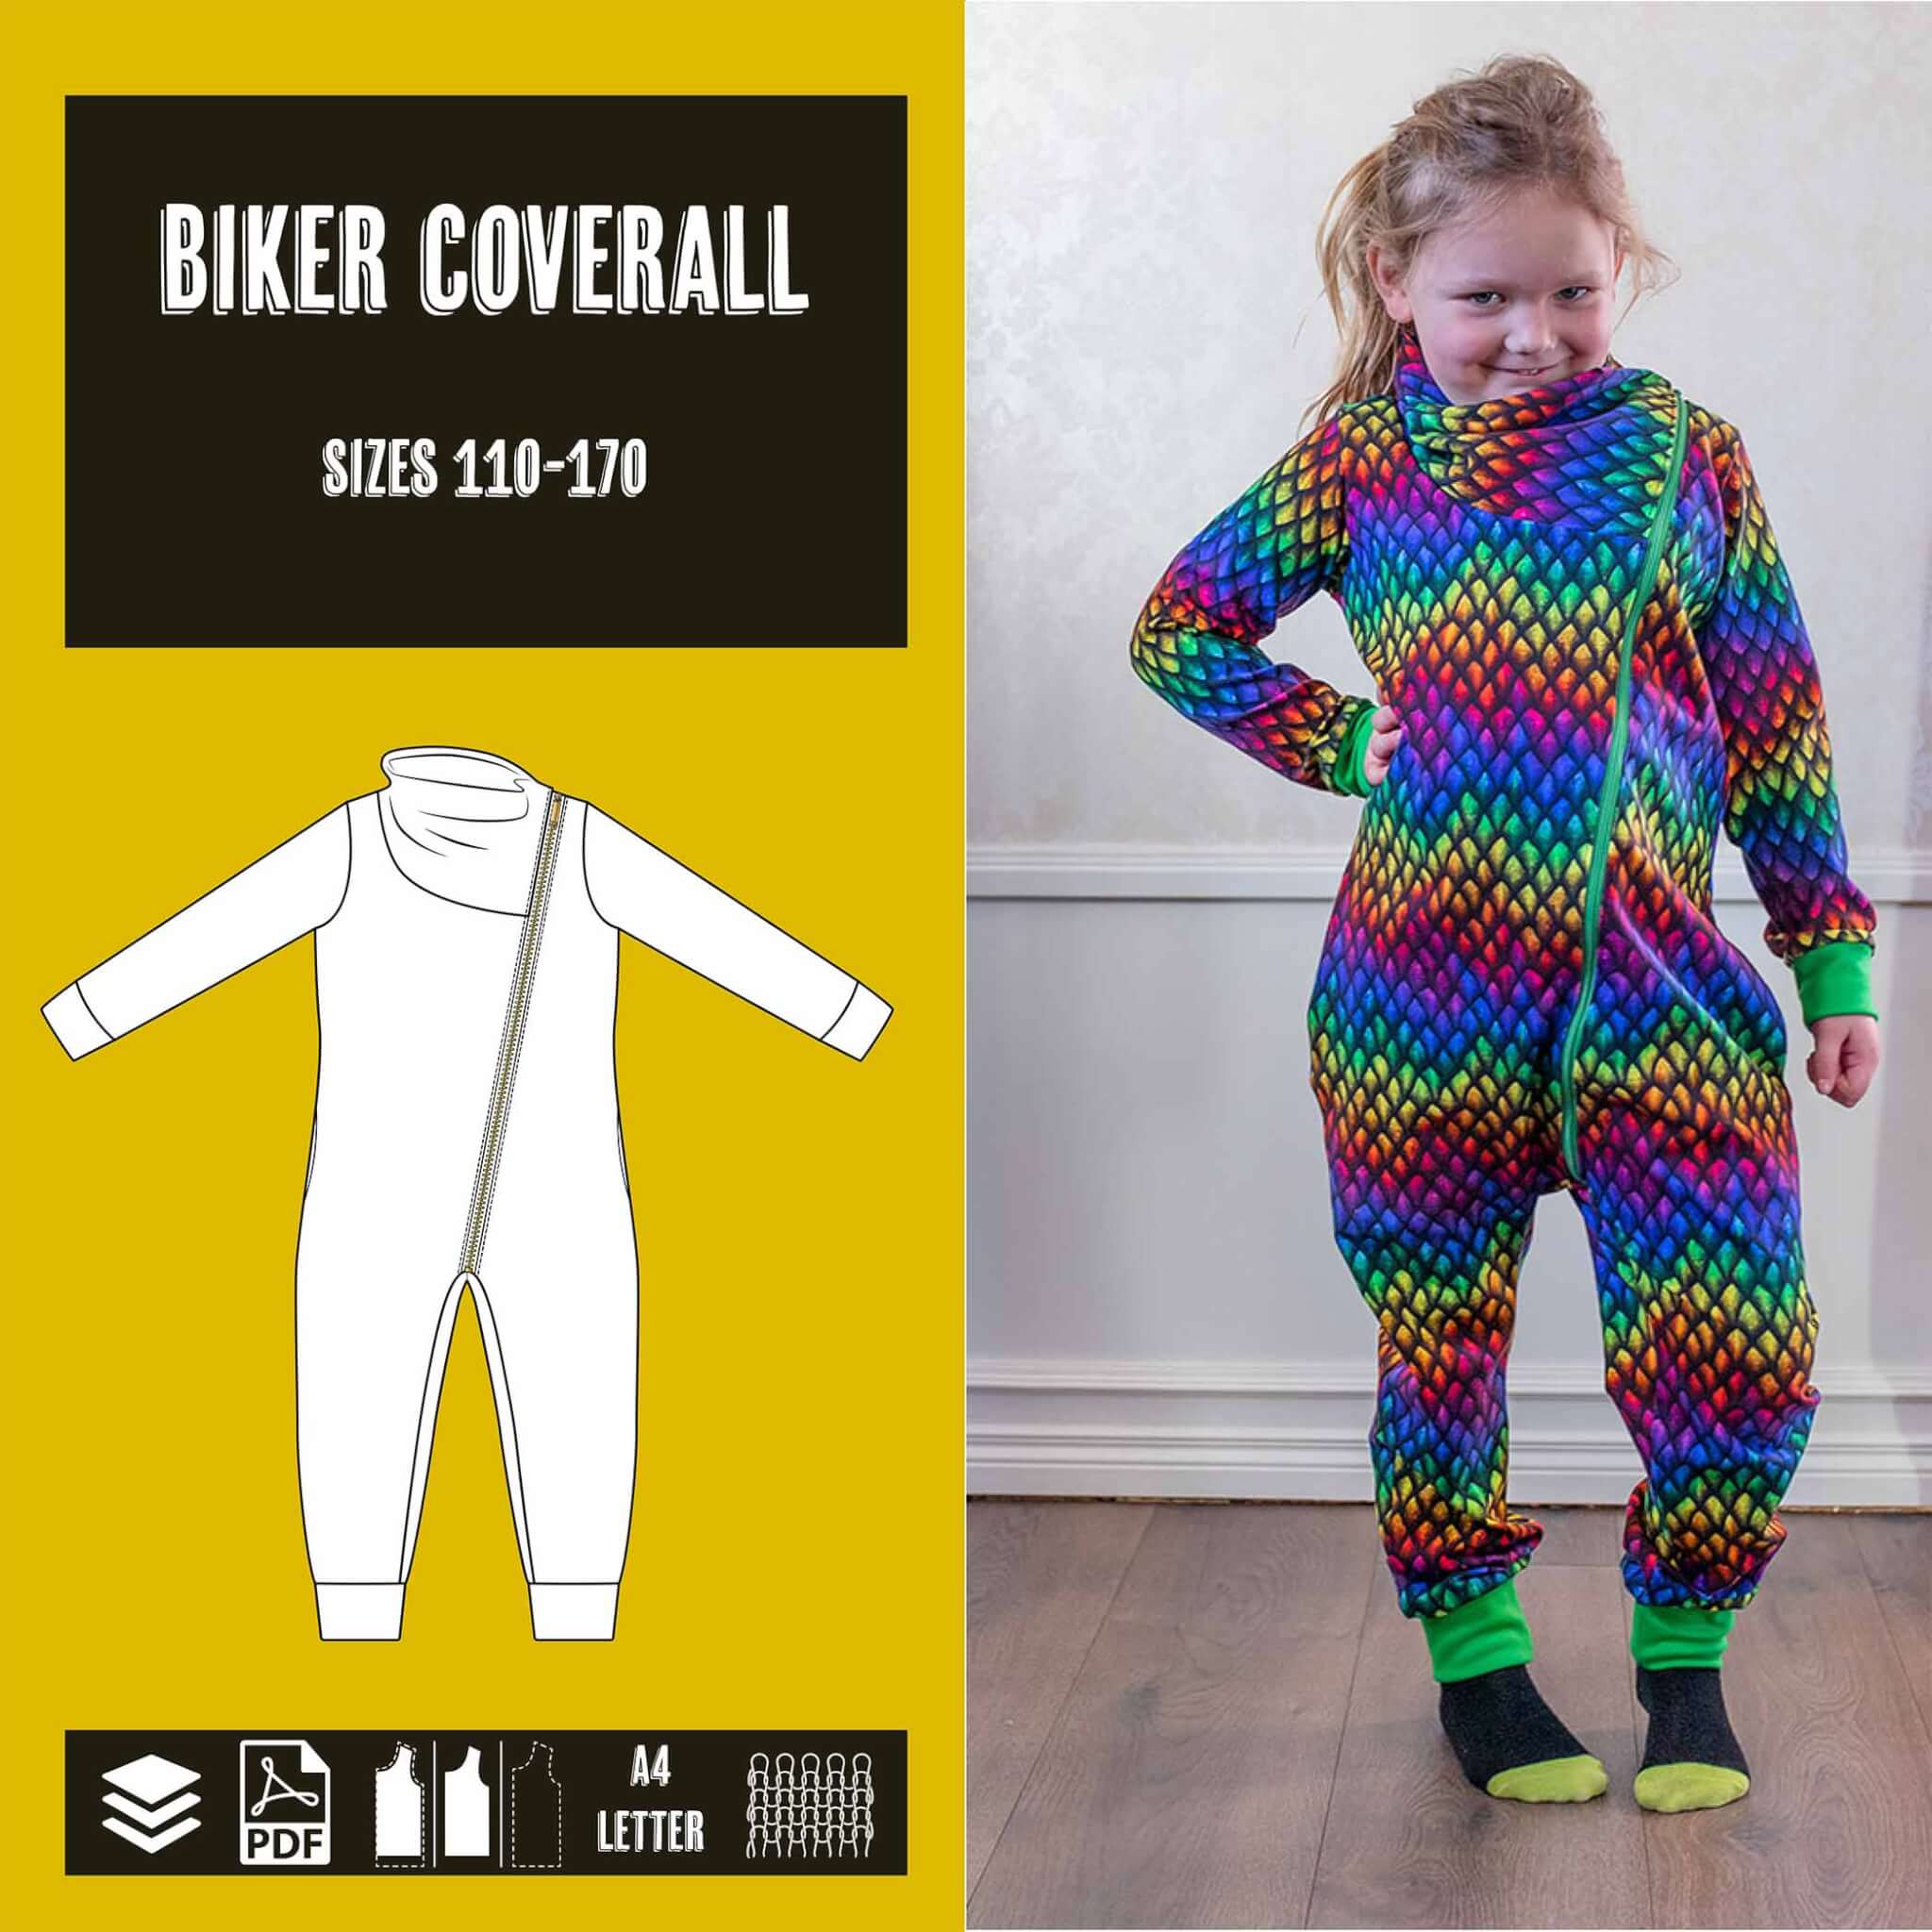 Biker coverall sewing pattern